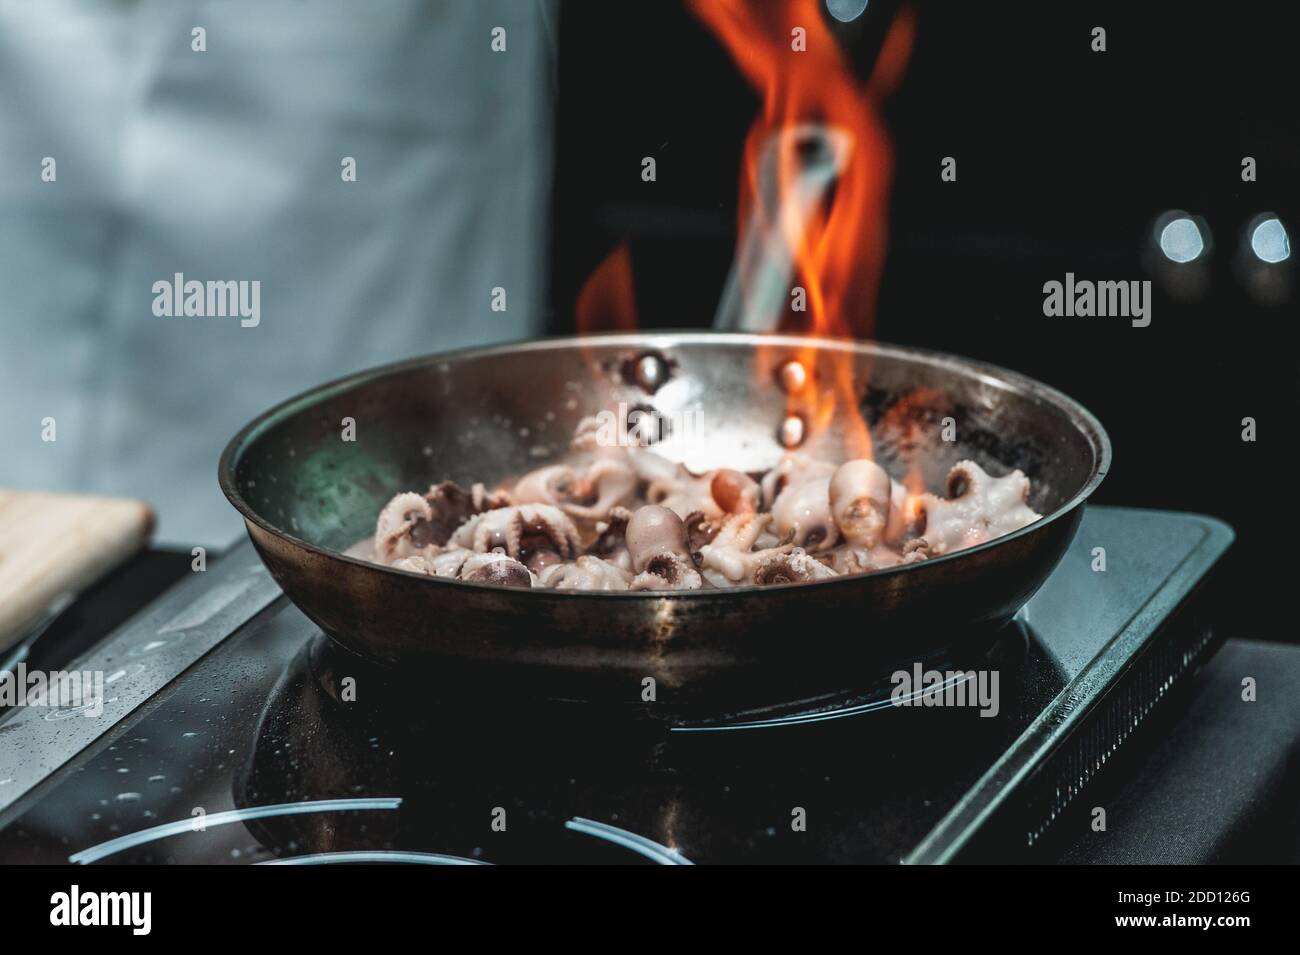 https://c8.alamy.com/comp/2DD126G/the-chef-cooks-small-octopus-on-a-metal-frying-pan-at-the-restaurant-to-make-brazilian-dish-pan-is-on-fire-2DD126G.jpg